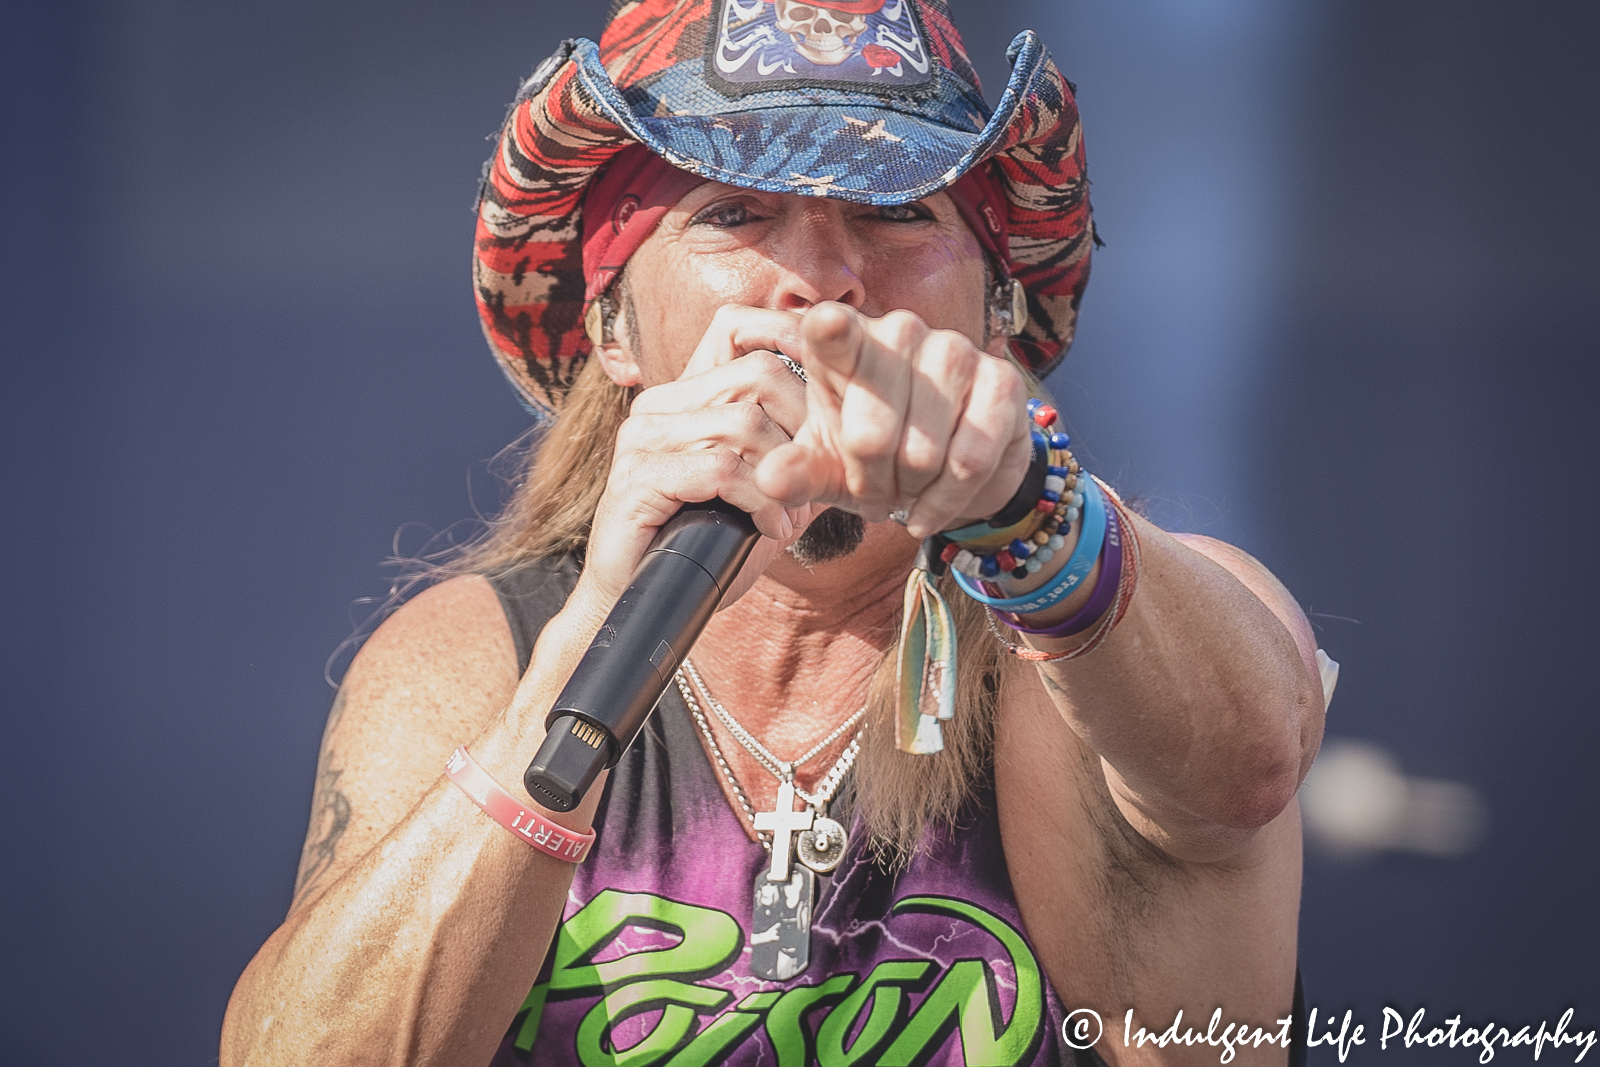 Poison frontman Bret Michaels singing "Look What the Cat Dragged In" during the stadium tour stop at Kauffman Stadium in Kansas City, MO on July 19, 2022.